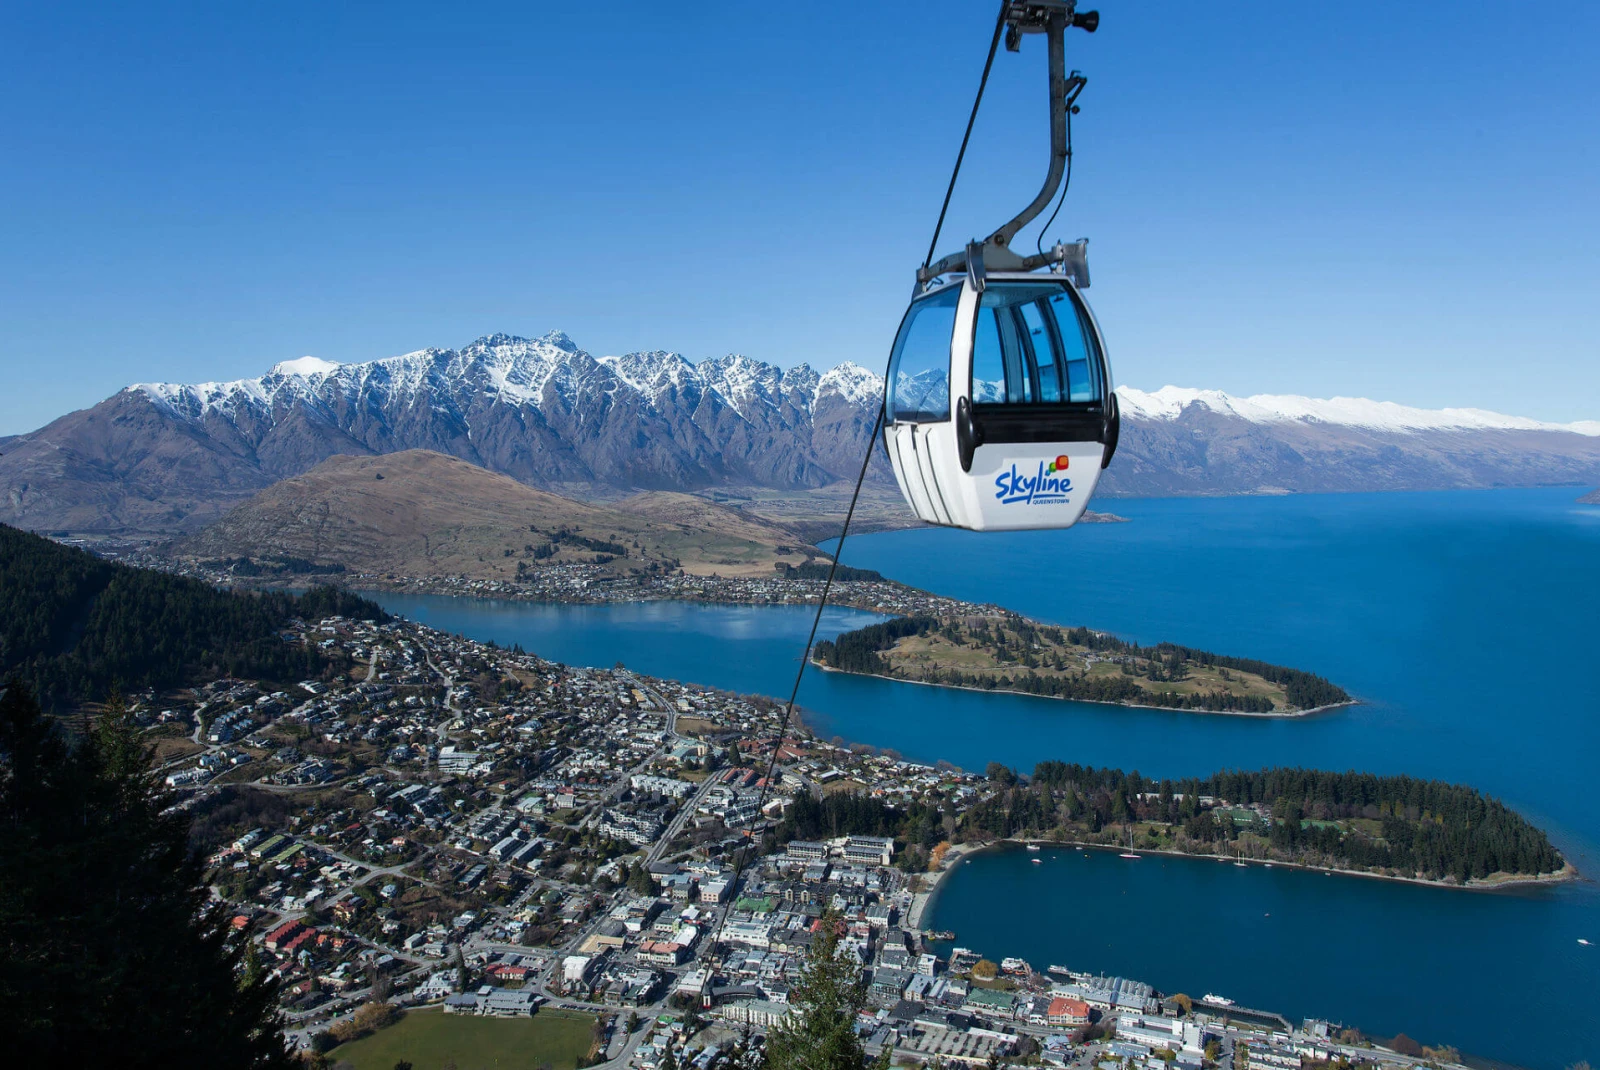 Skyline Queenstown offers breathtaking views and exhilarating experiences, combining gondola rides, dining, and adventure activities in the stunning alpine surroundings of Queenstown, New Zealand.